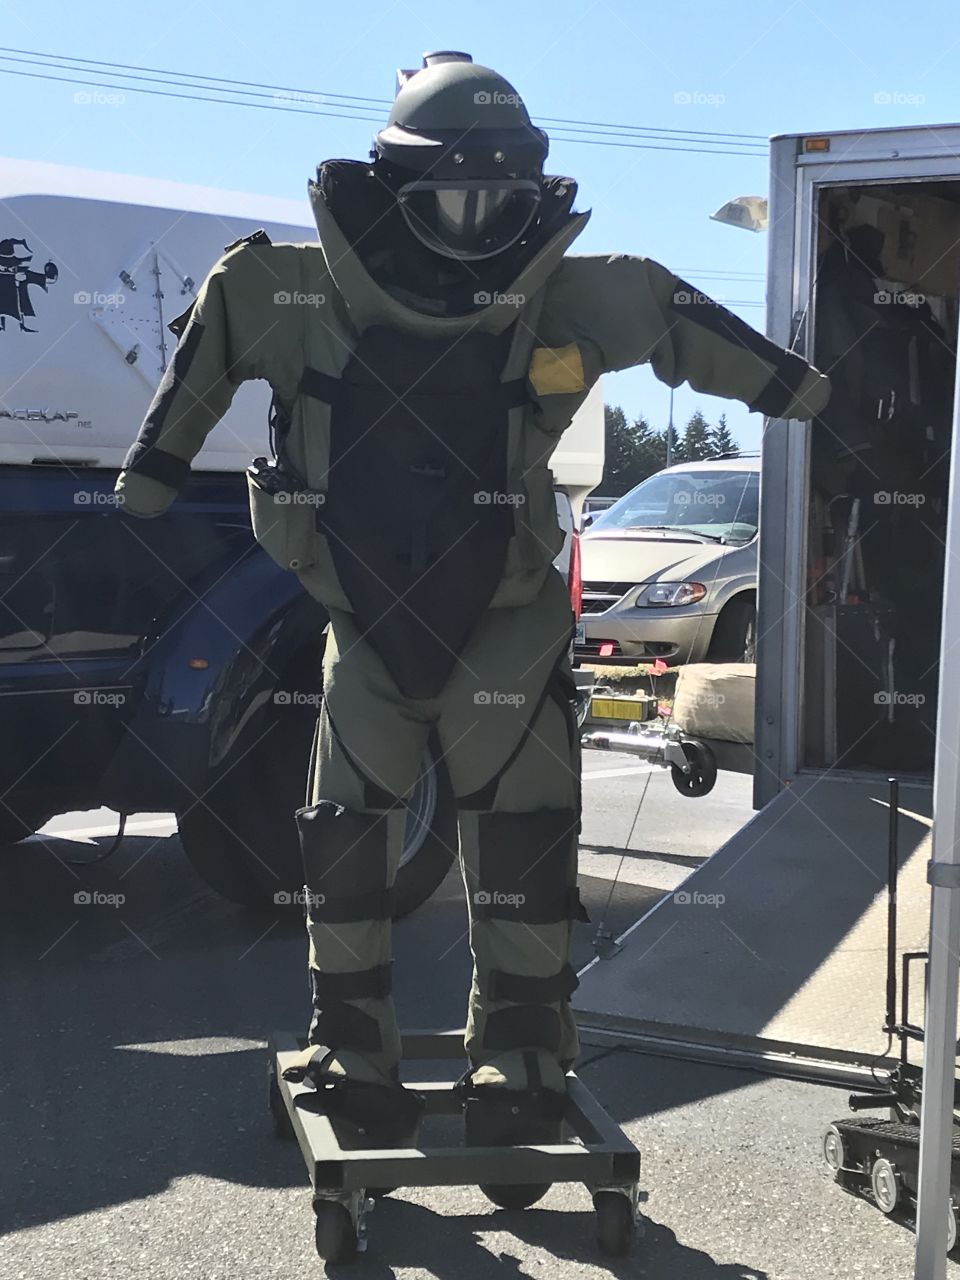 An explosive protection suit used by EOD members of the Canadian military.